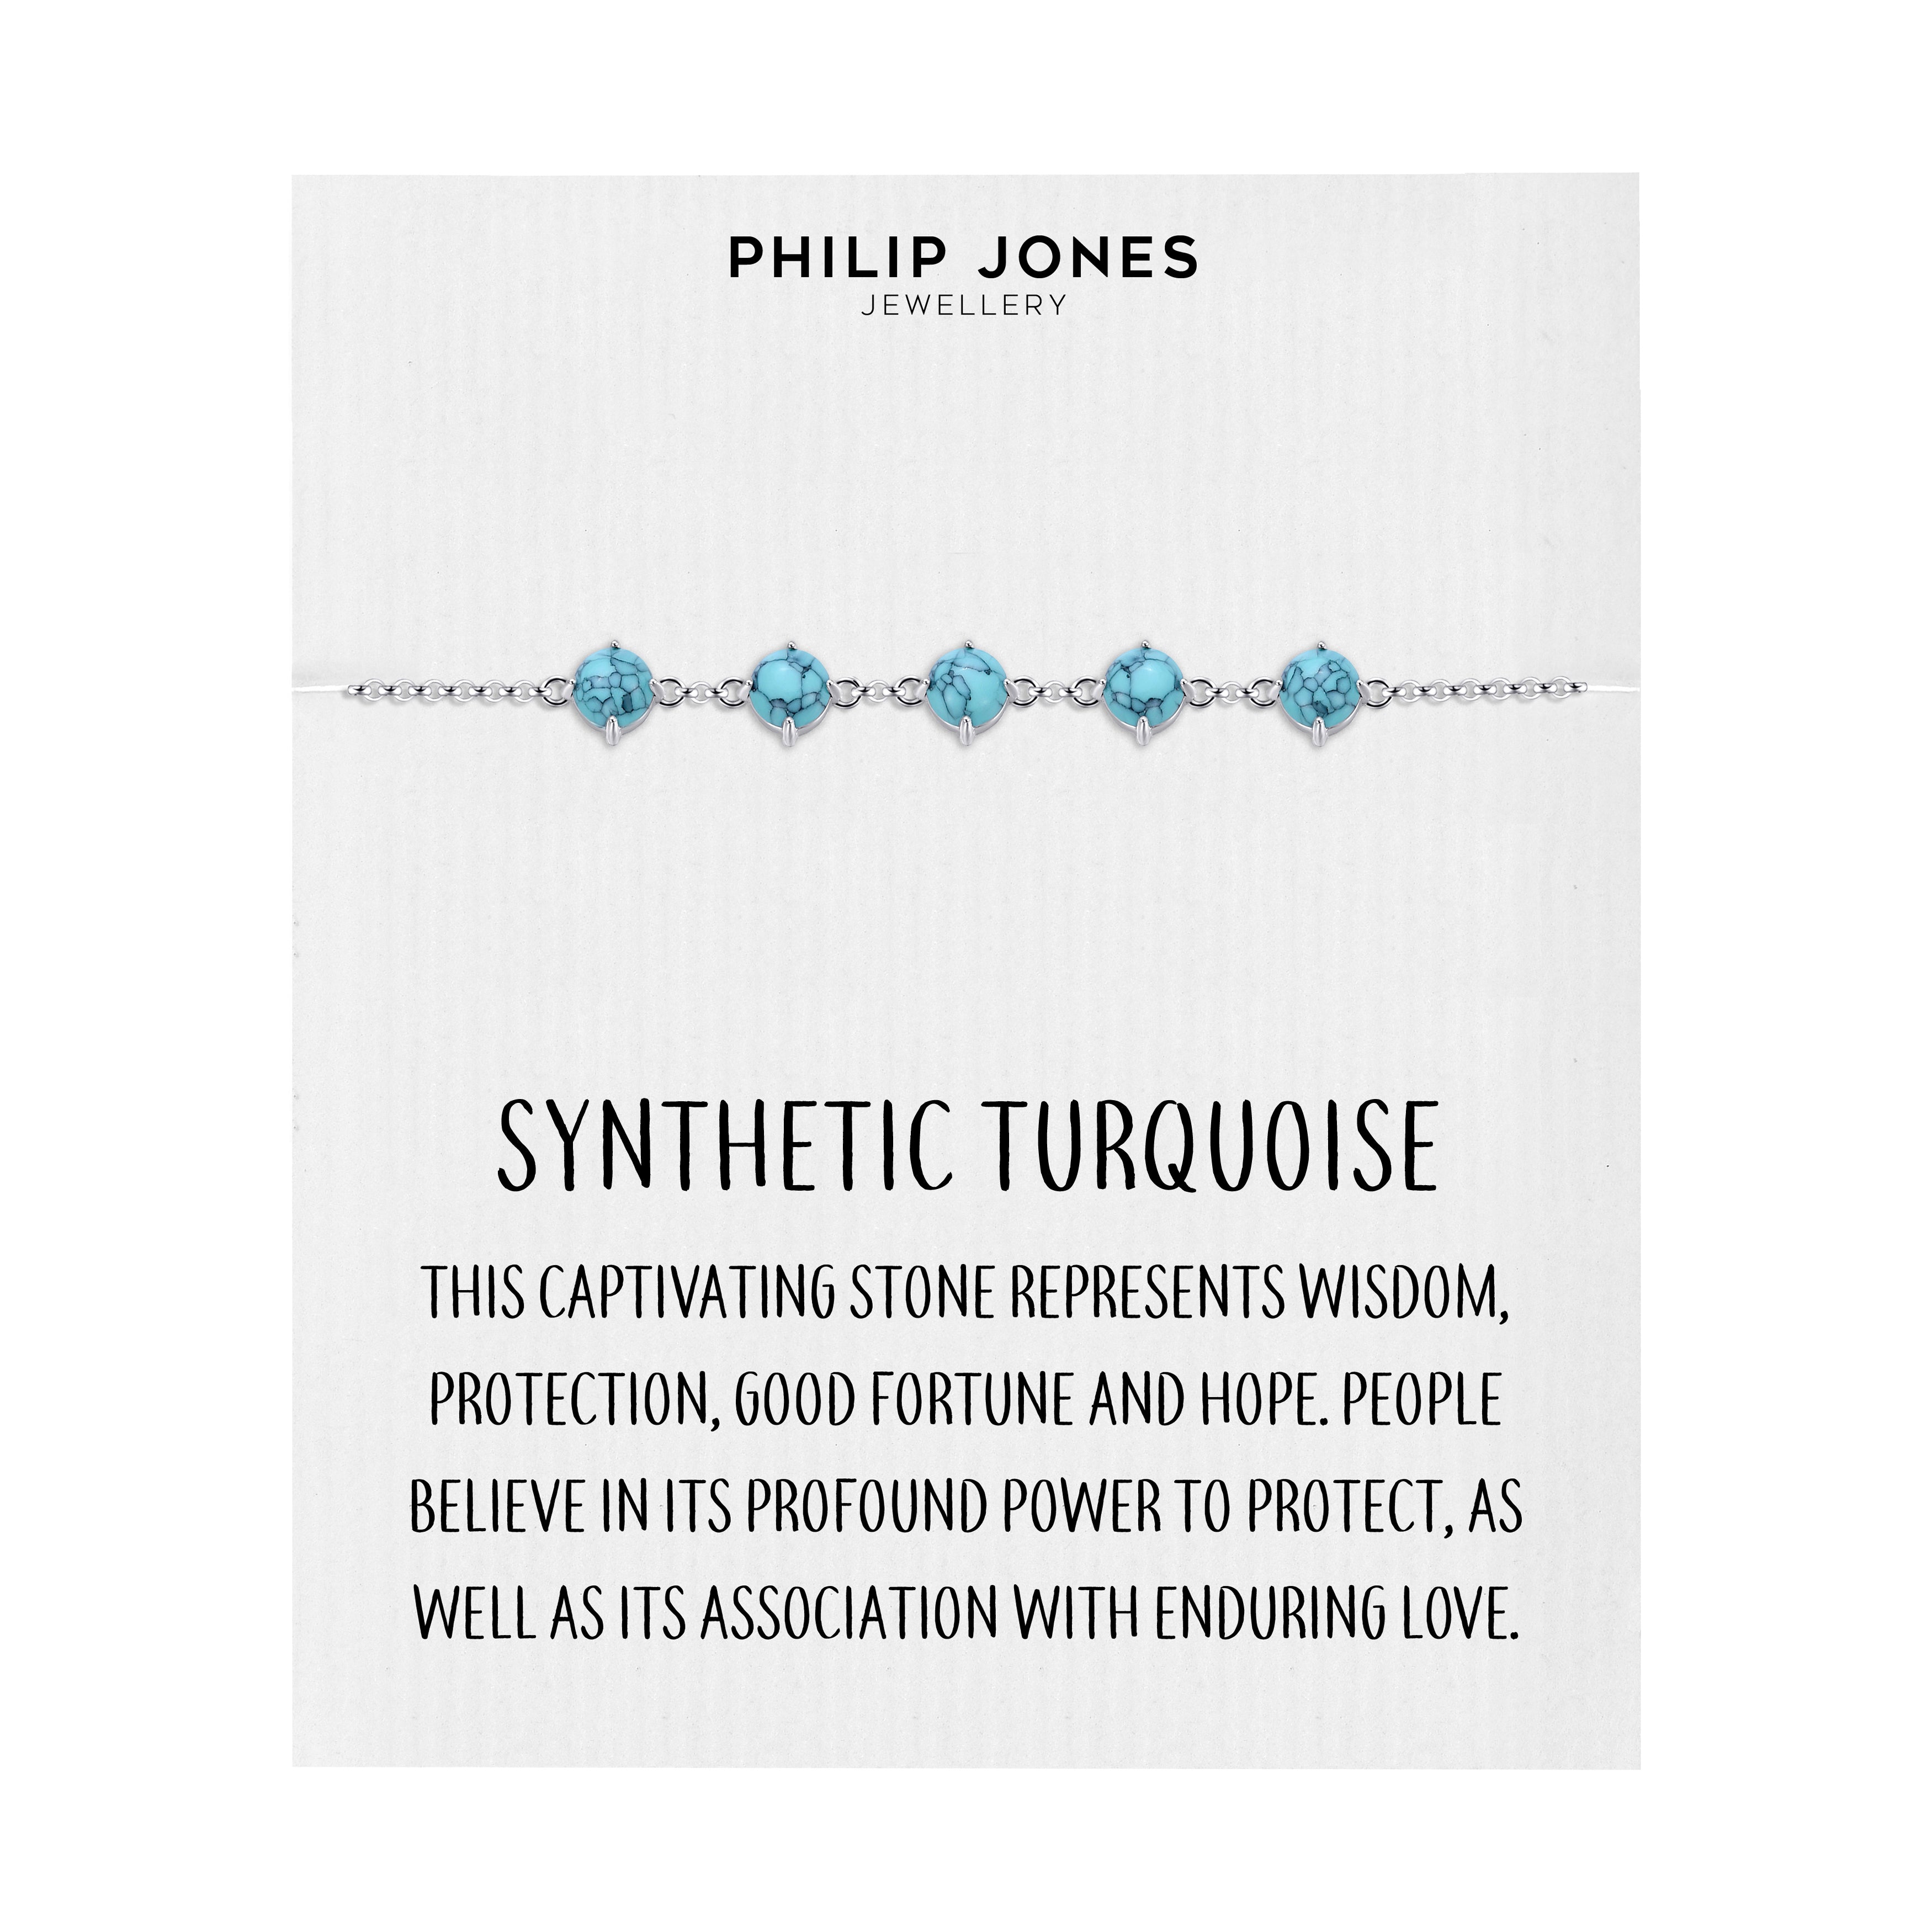 Synthetic Turquoise Gemstone Bracelet with Quote Card by Philip Jones Jewellery